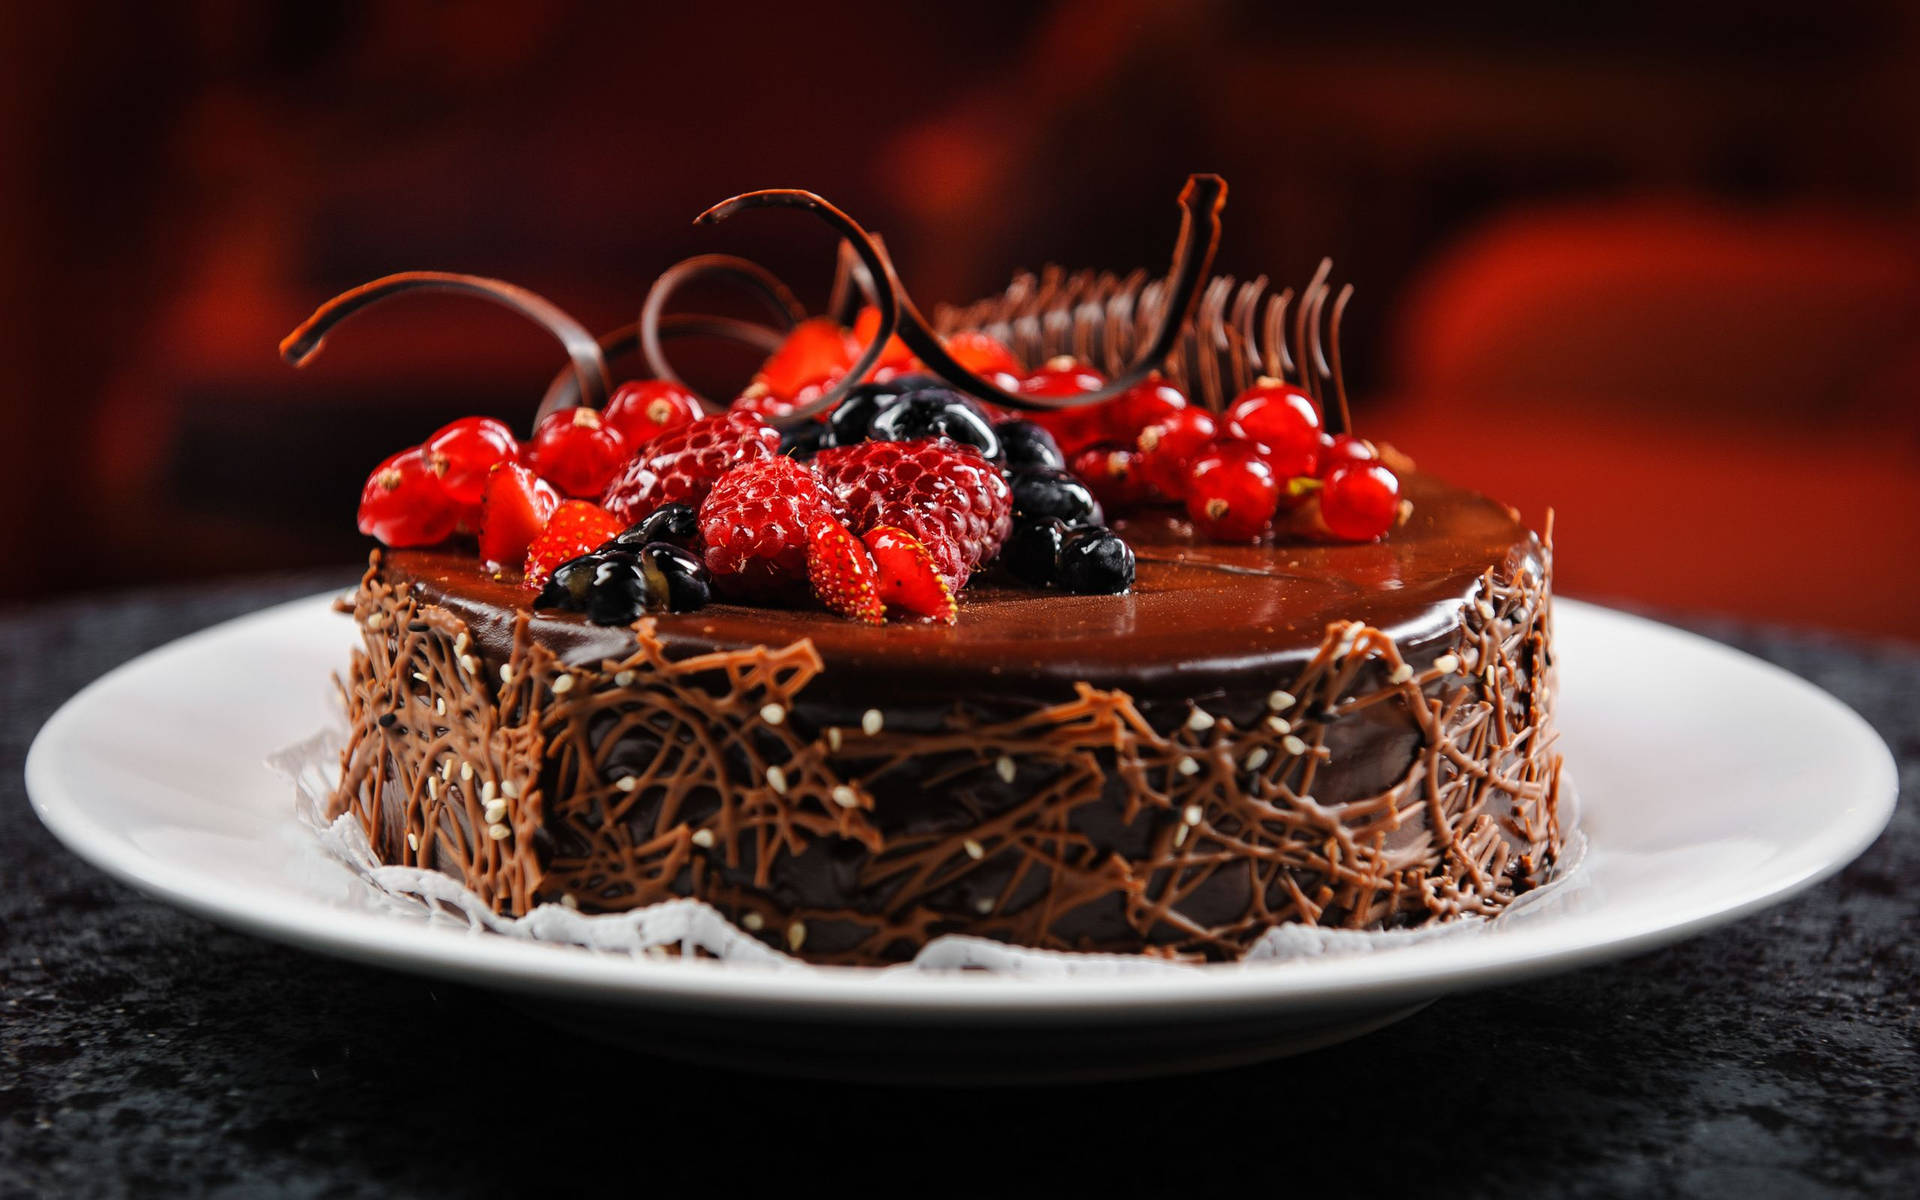 Birthday Cake With Decadent Fruit Toppings Background